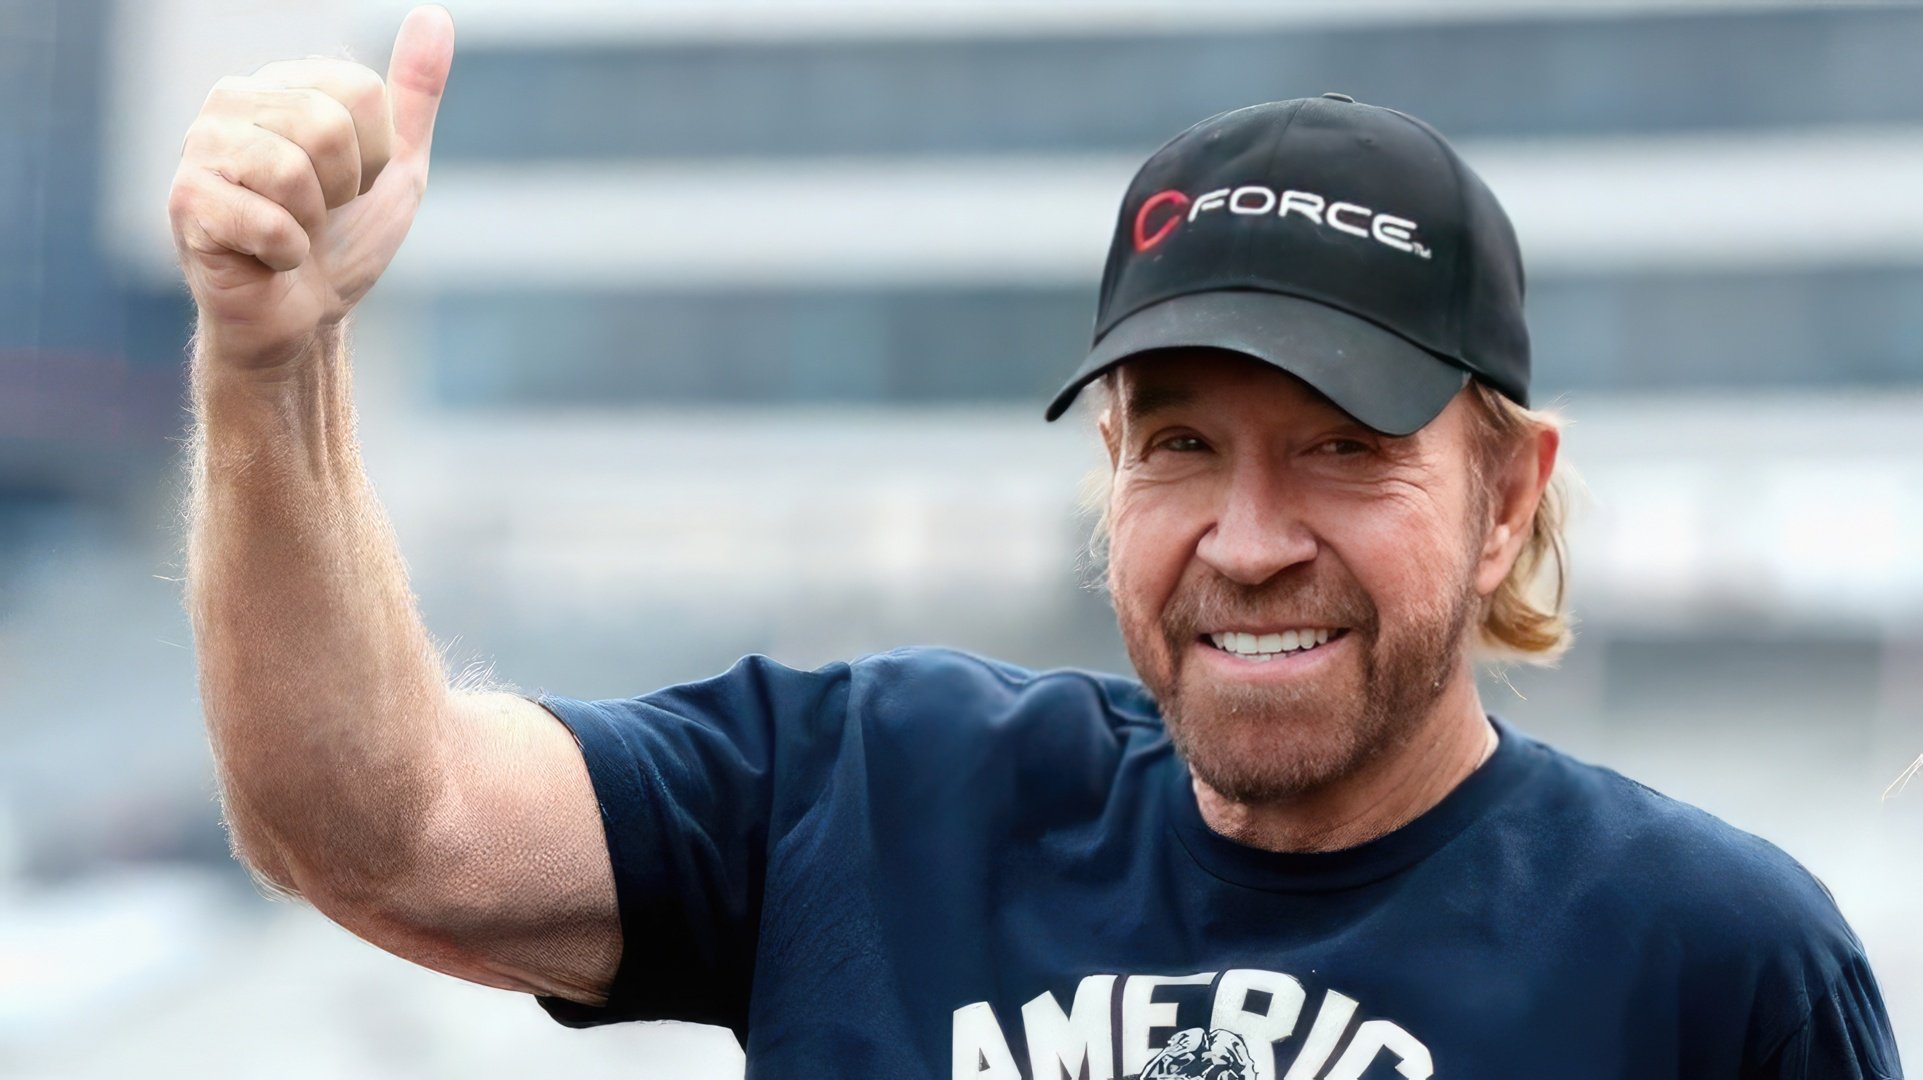 Chuck Norris became interested in political activity